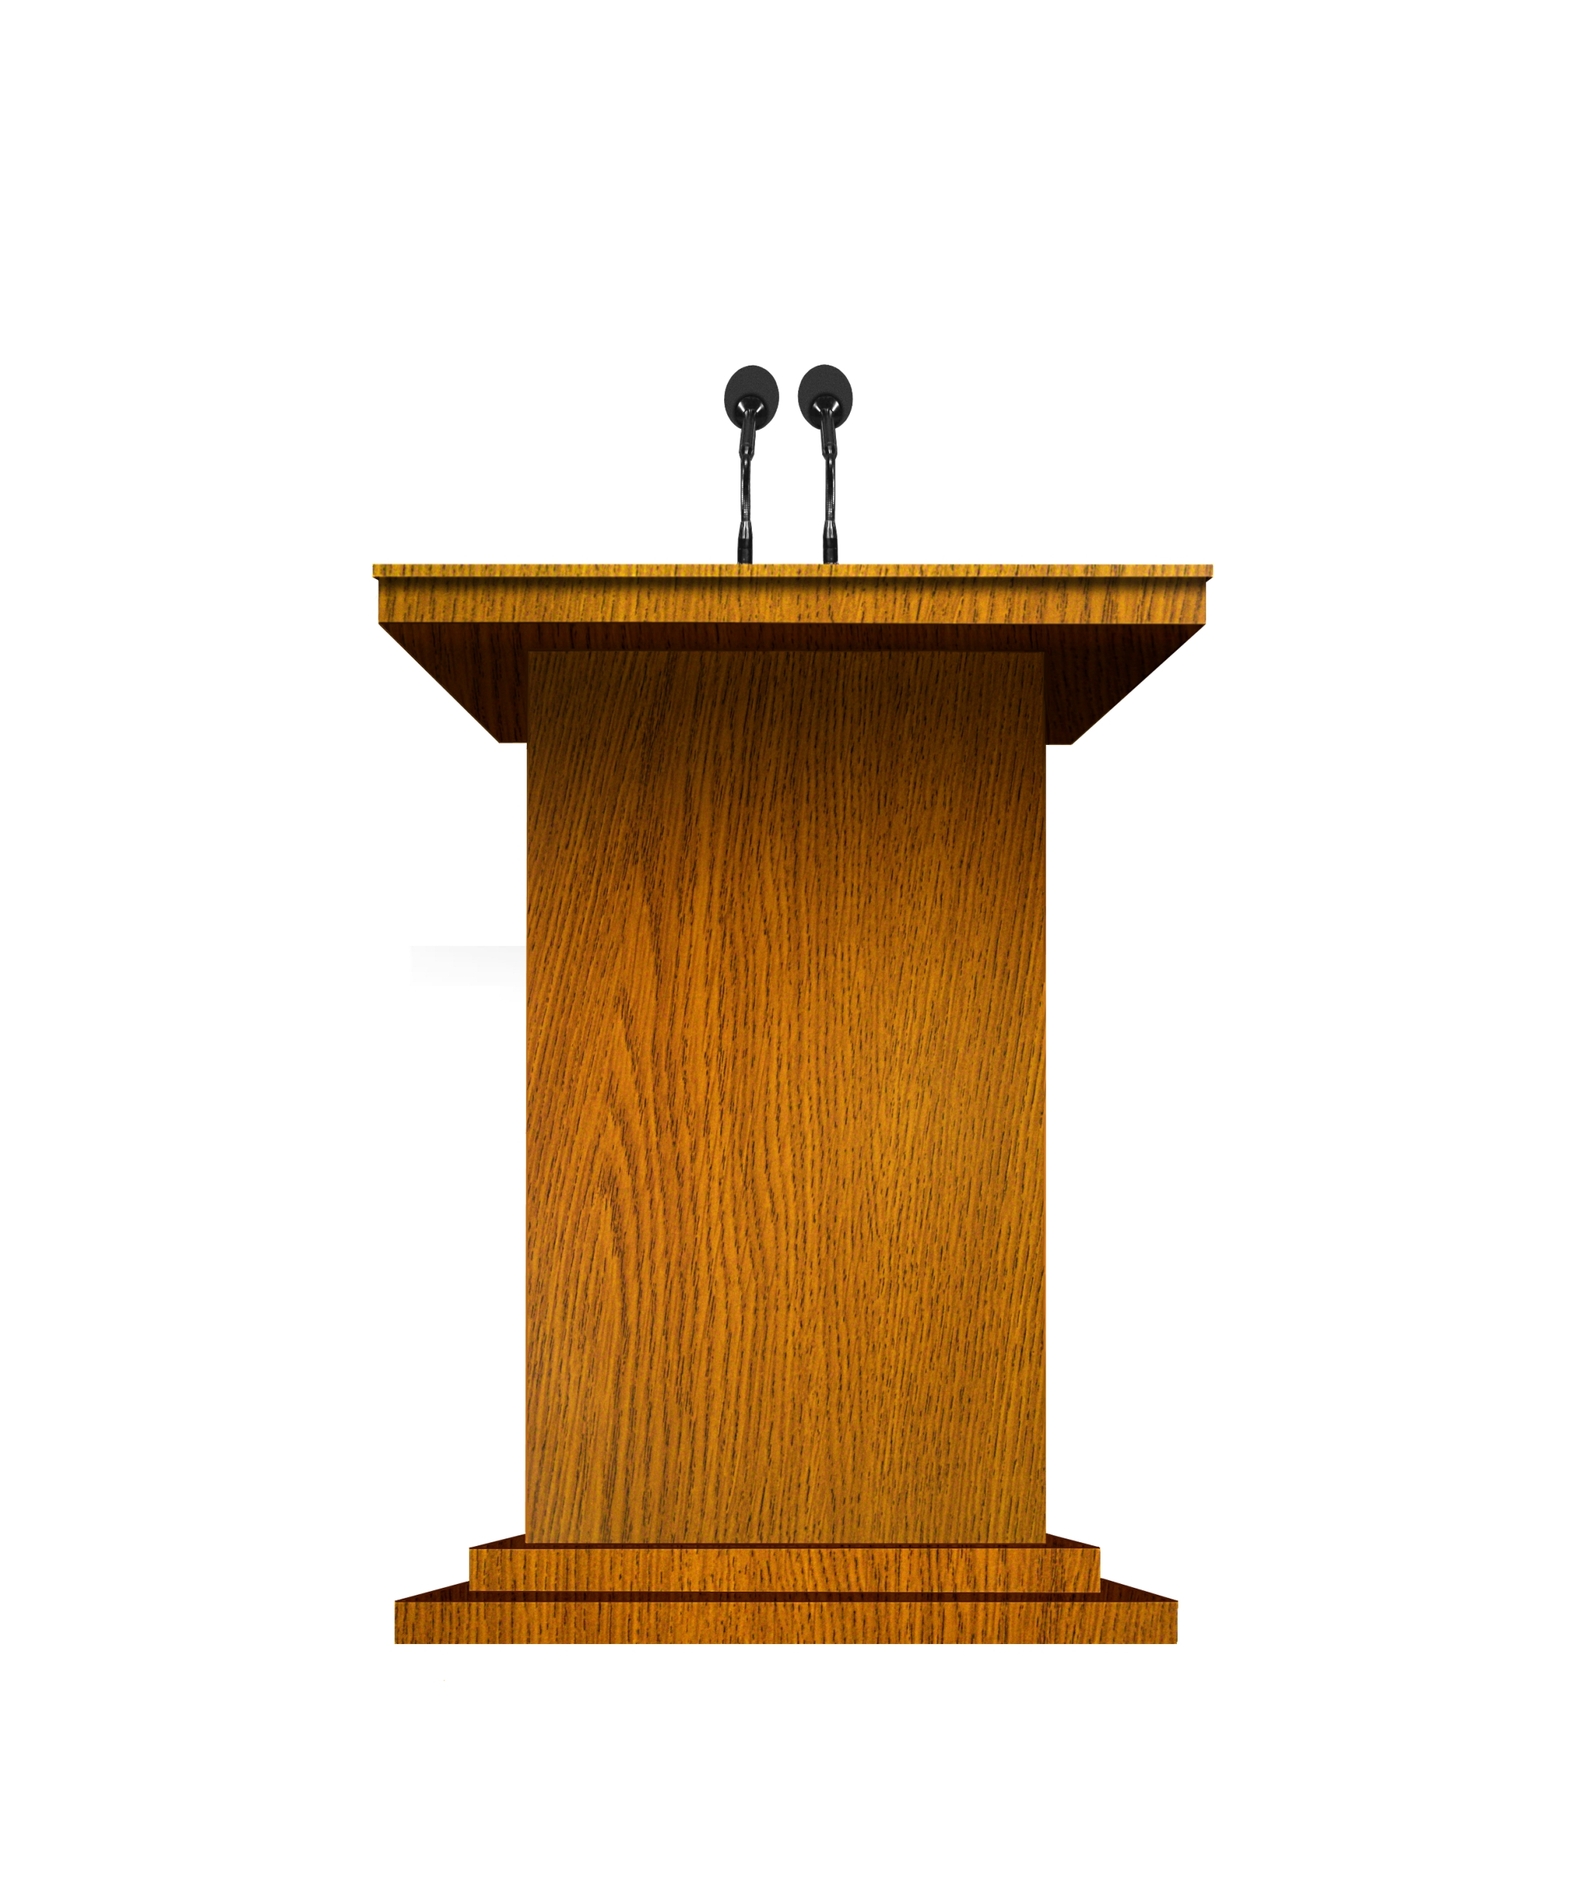      Royalty Free Stock Image Podium Microphones Over White Image32629836